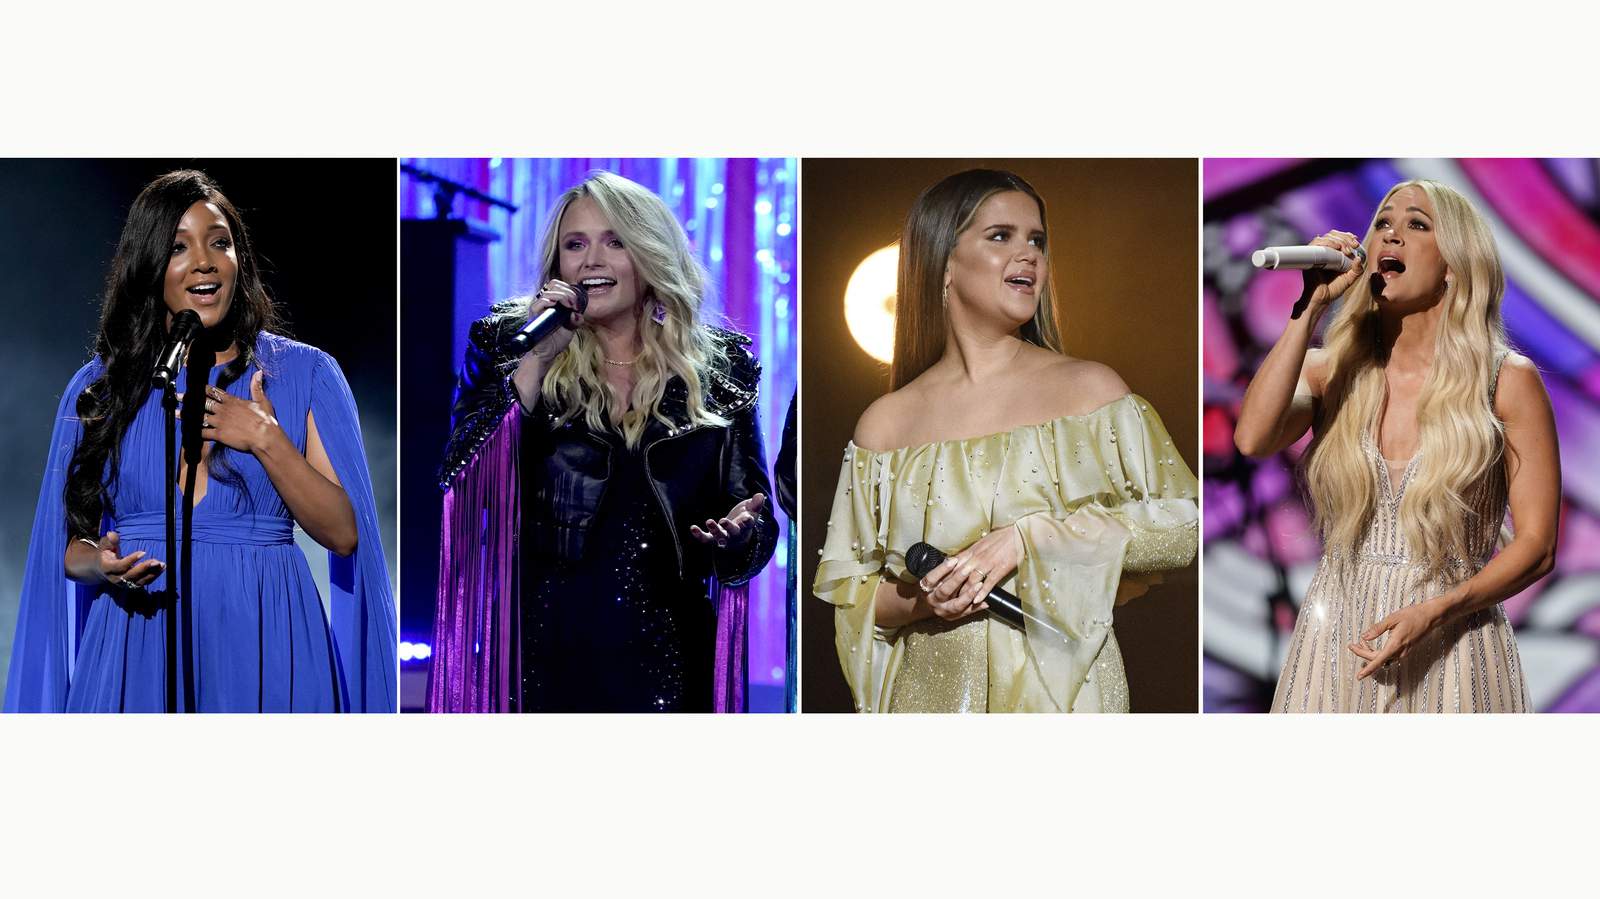 Recap: ACM Awards features (most of) country music’s top stars